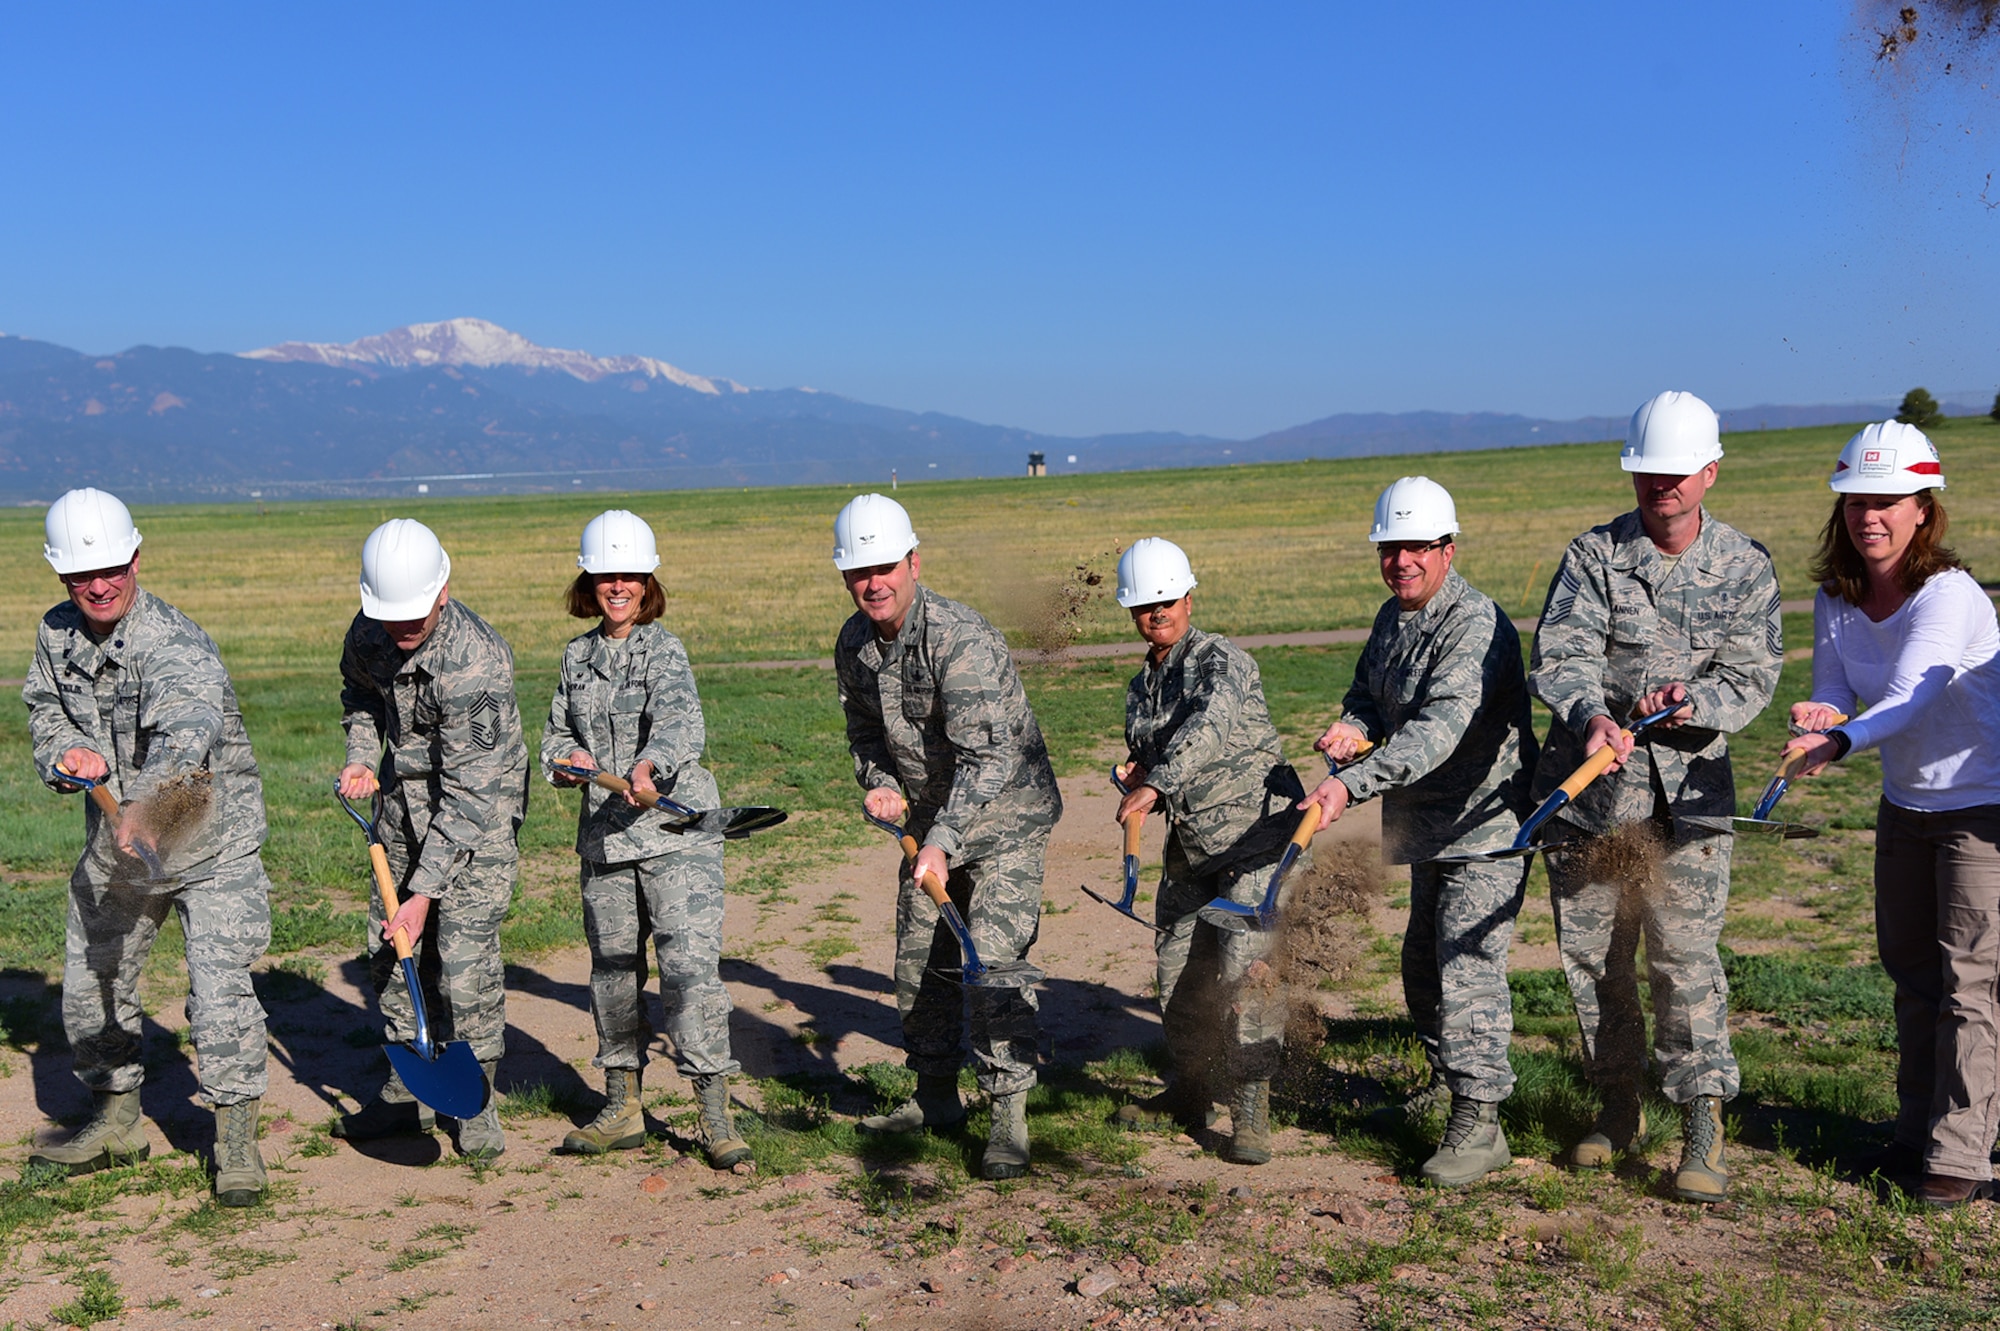 PETERSON AIR FORCE BASE Colo. – Col. Douglas Schiess, 21st Space Wing commander, and Chief Master Sgt. Idalia Peele, 21st Space Wing command chief, assist the 21st Medical Group leadership in breaking ground on where the new dental clinic will be on Peterson Air Force Base, Colo., May 25, 2016. The new clinic is expected to be completed in the fall of 2017. (U.S. Air Force photo by Staff Sgt. Amber Grimm)